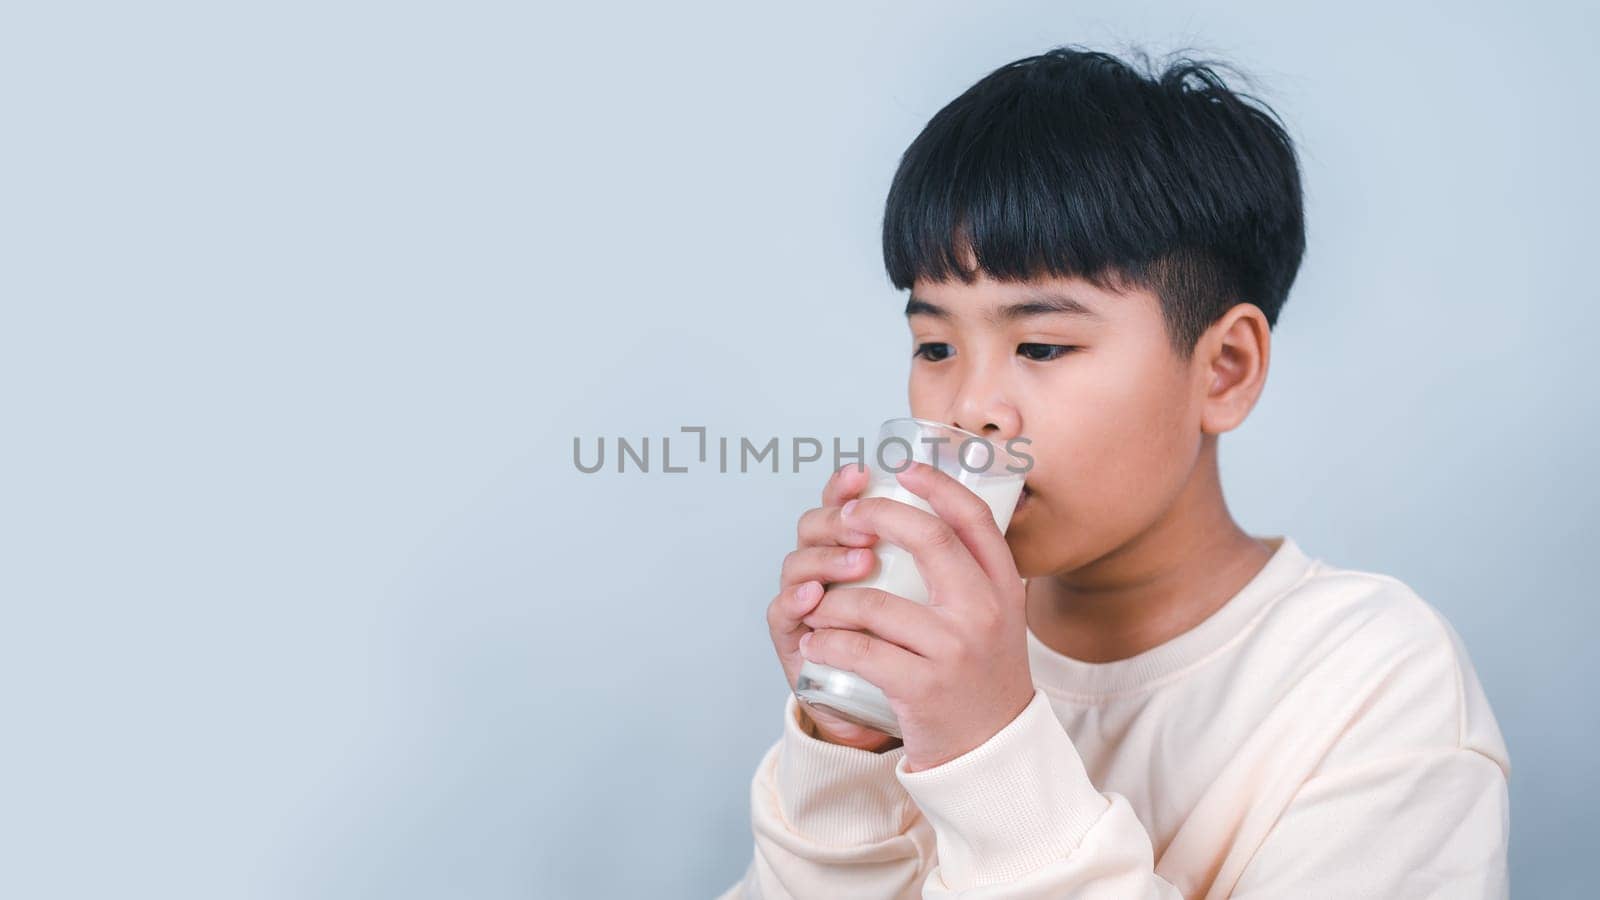 Concept of happy good nutrition, Portrait of a little young handsome kid boy in cream color shirt, Hold drinking milk box mockup, Isolated on white background.